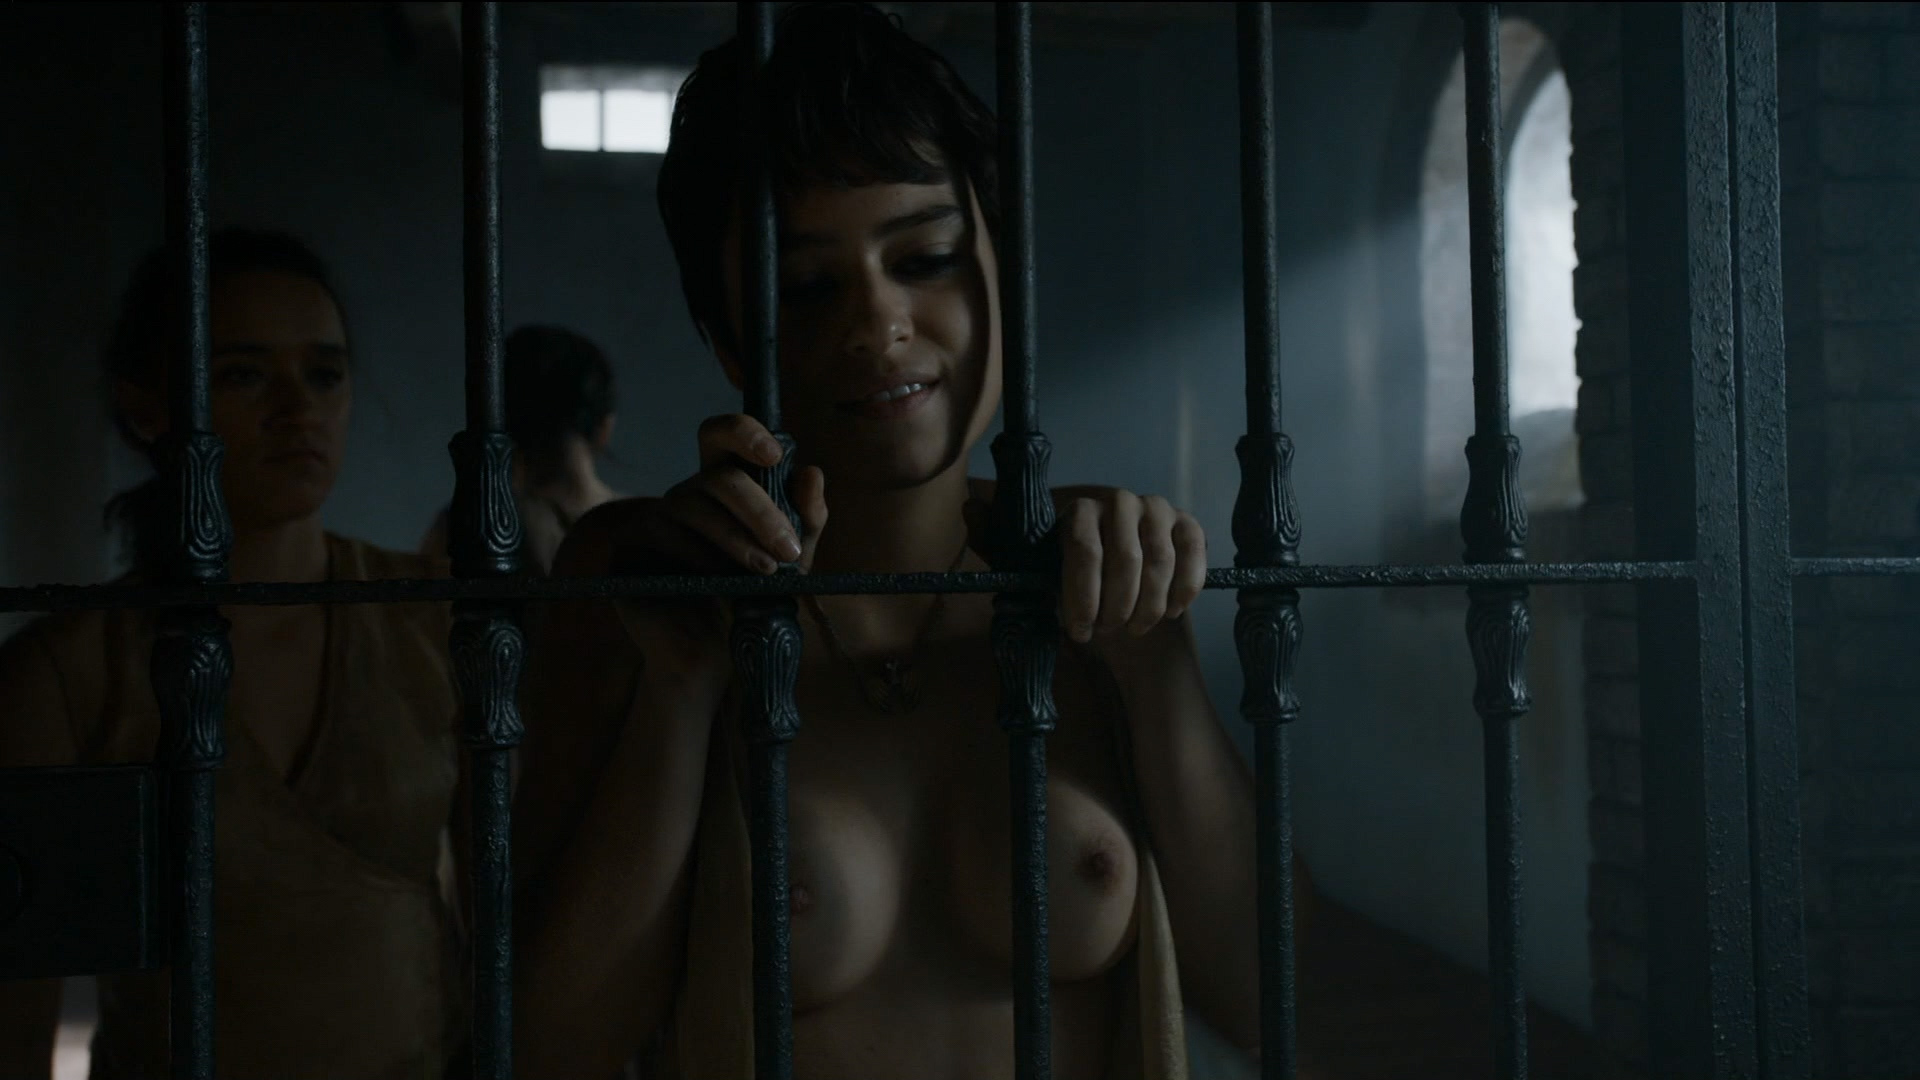 Naked Rosabell Laurenti Sellers In Game Of Thrones 